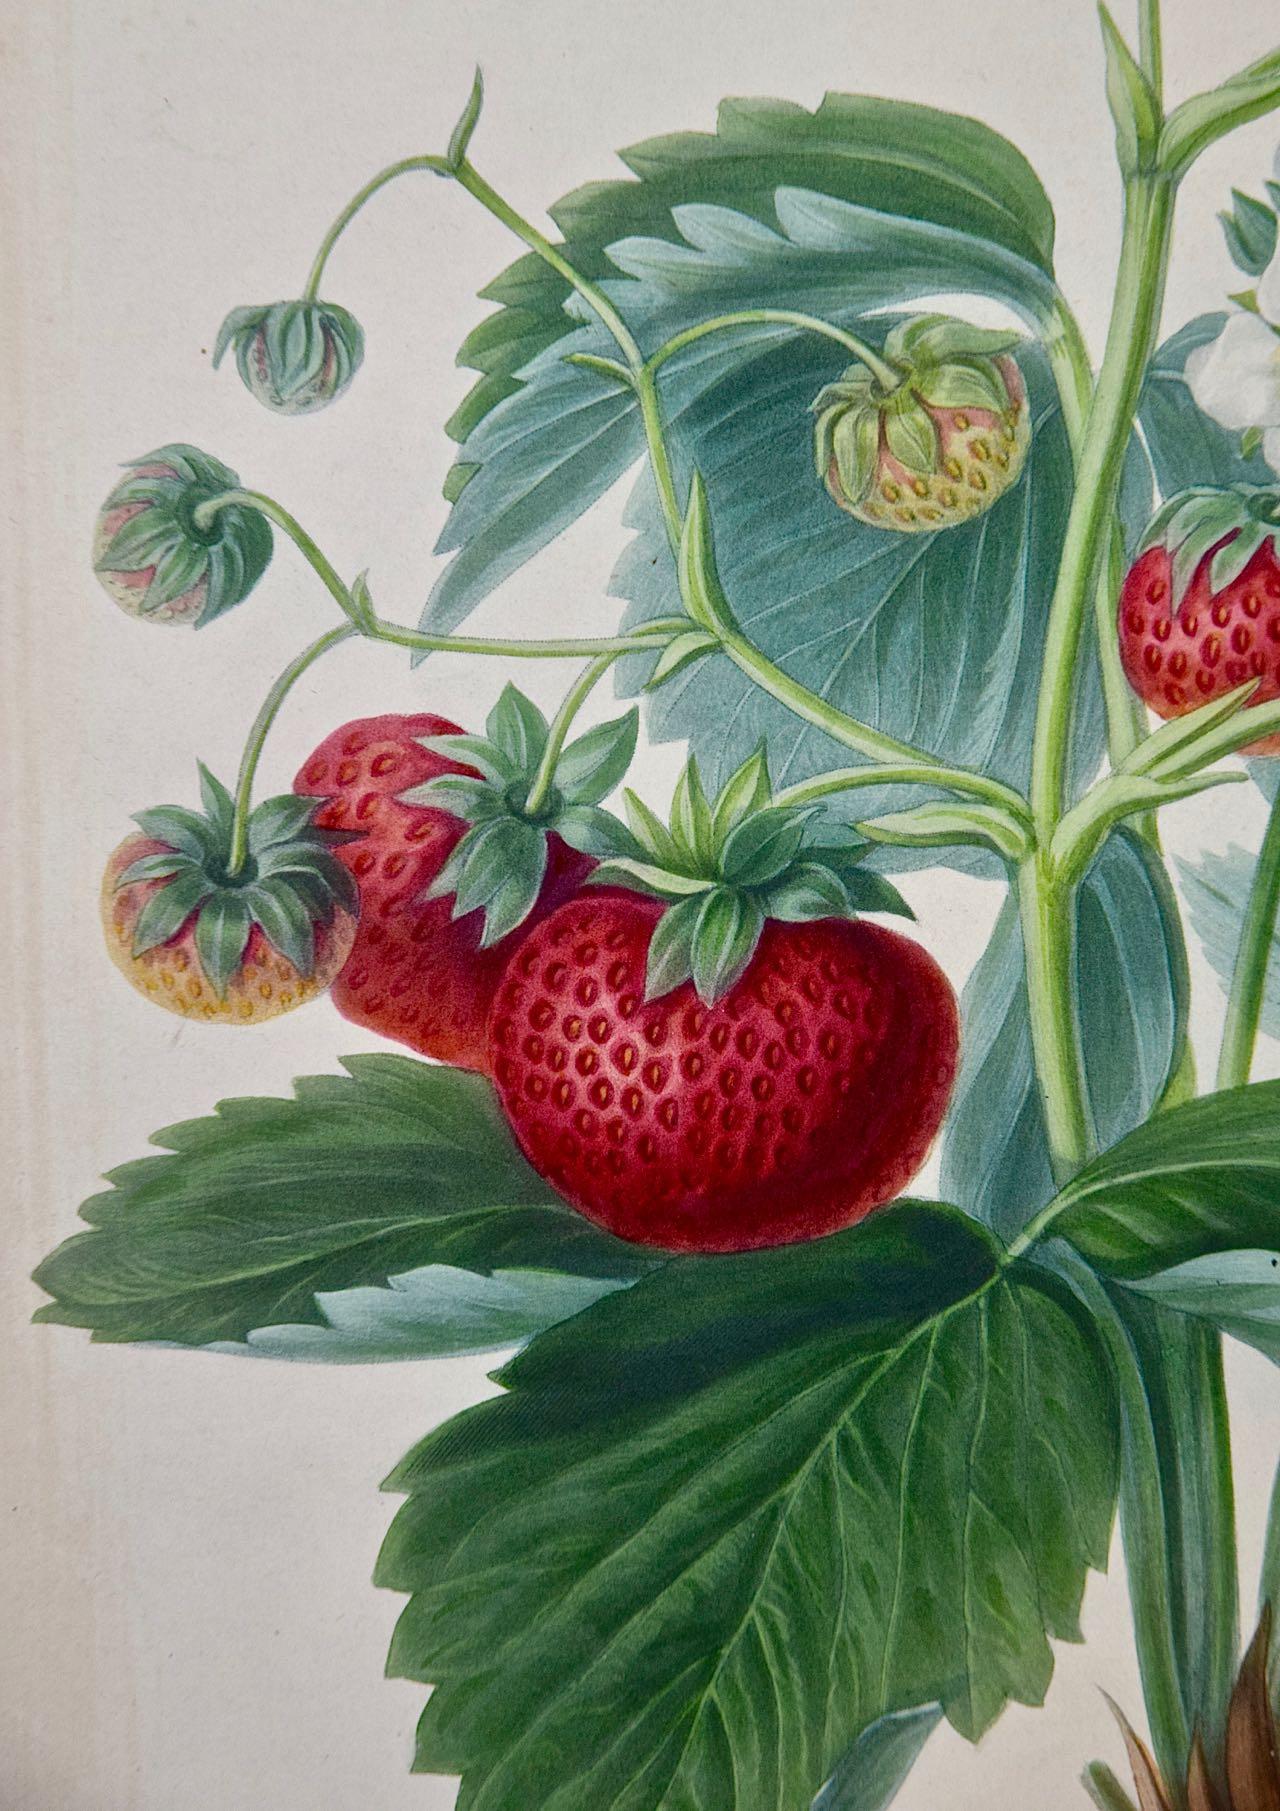 Flowering Strawberry Plants with Fruit: A 19th Century Hand-colored Engraving - Print by Charles Robertson